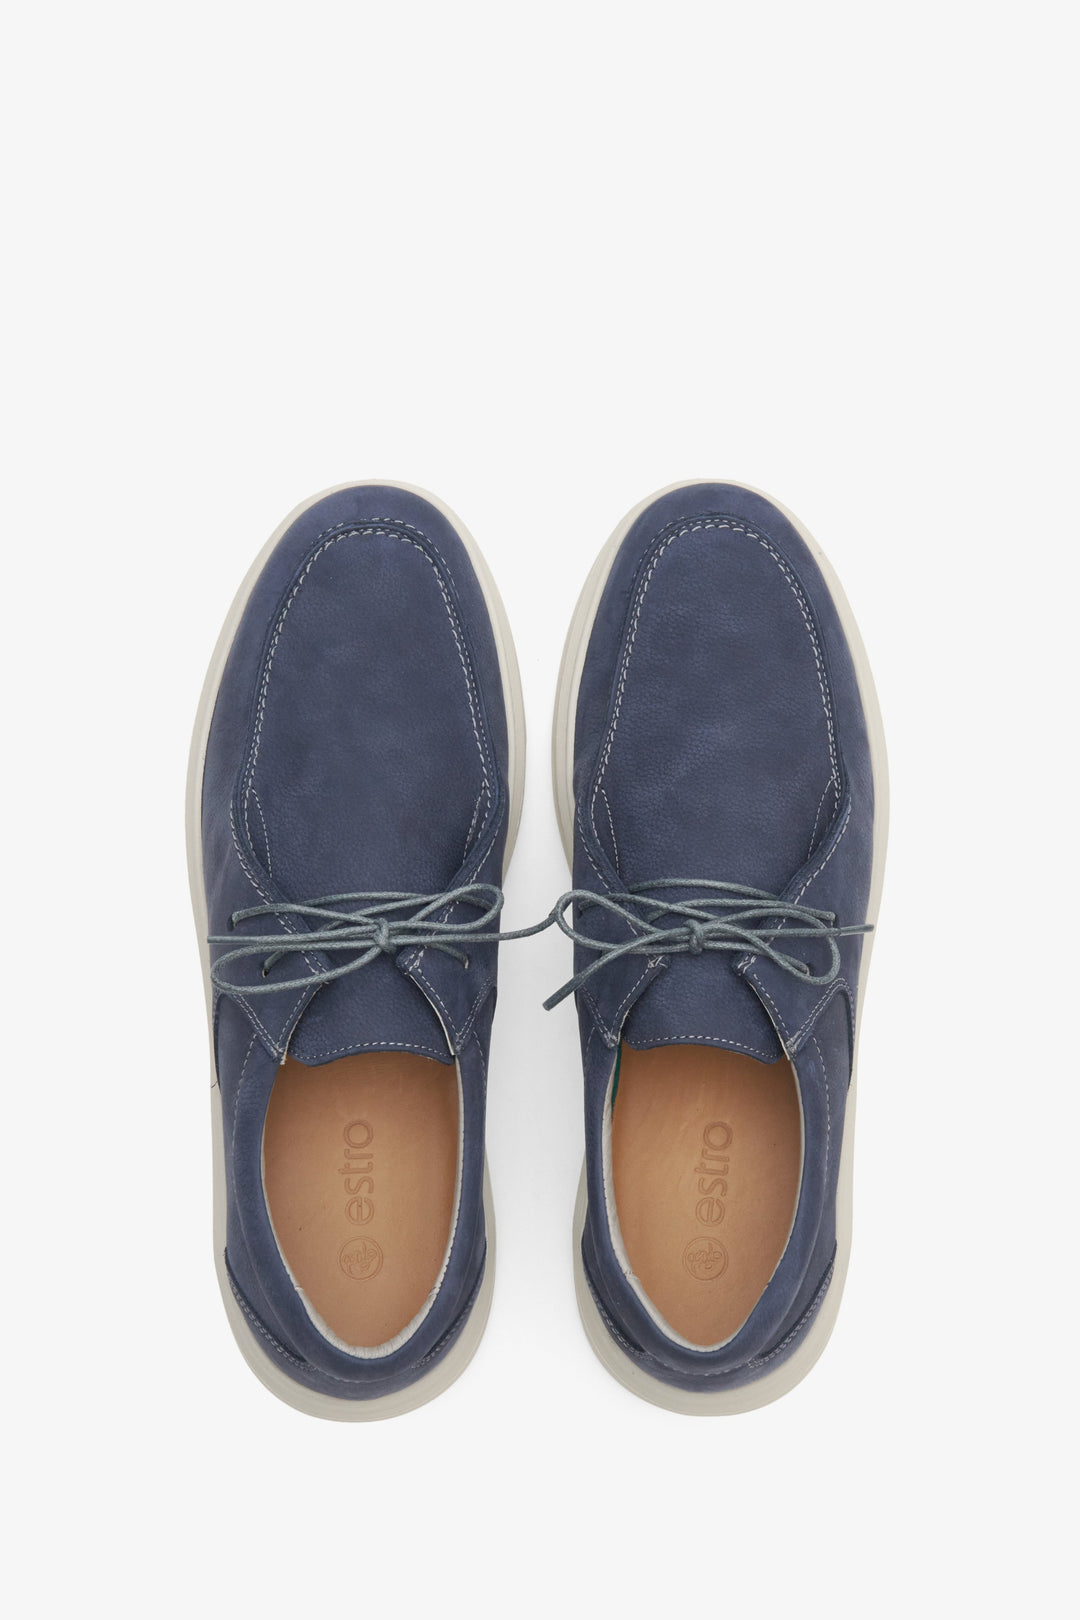 Estro men's loafers made of genuine blue velour - top view presentation of the model.